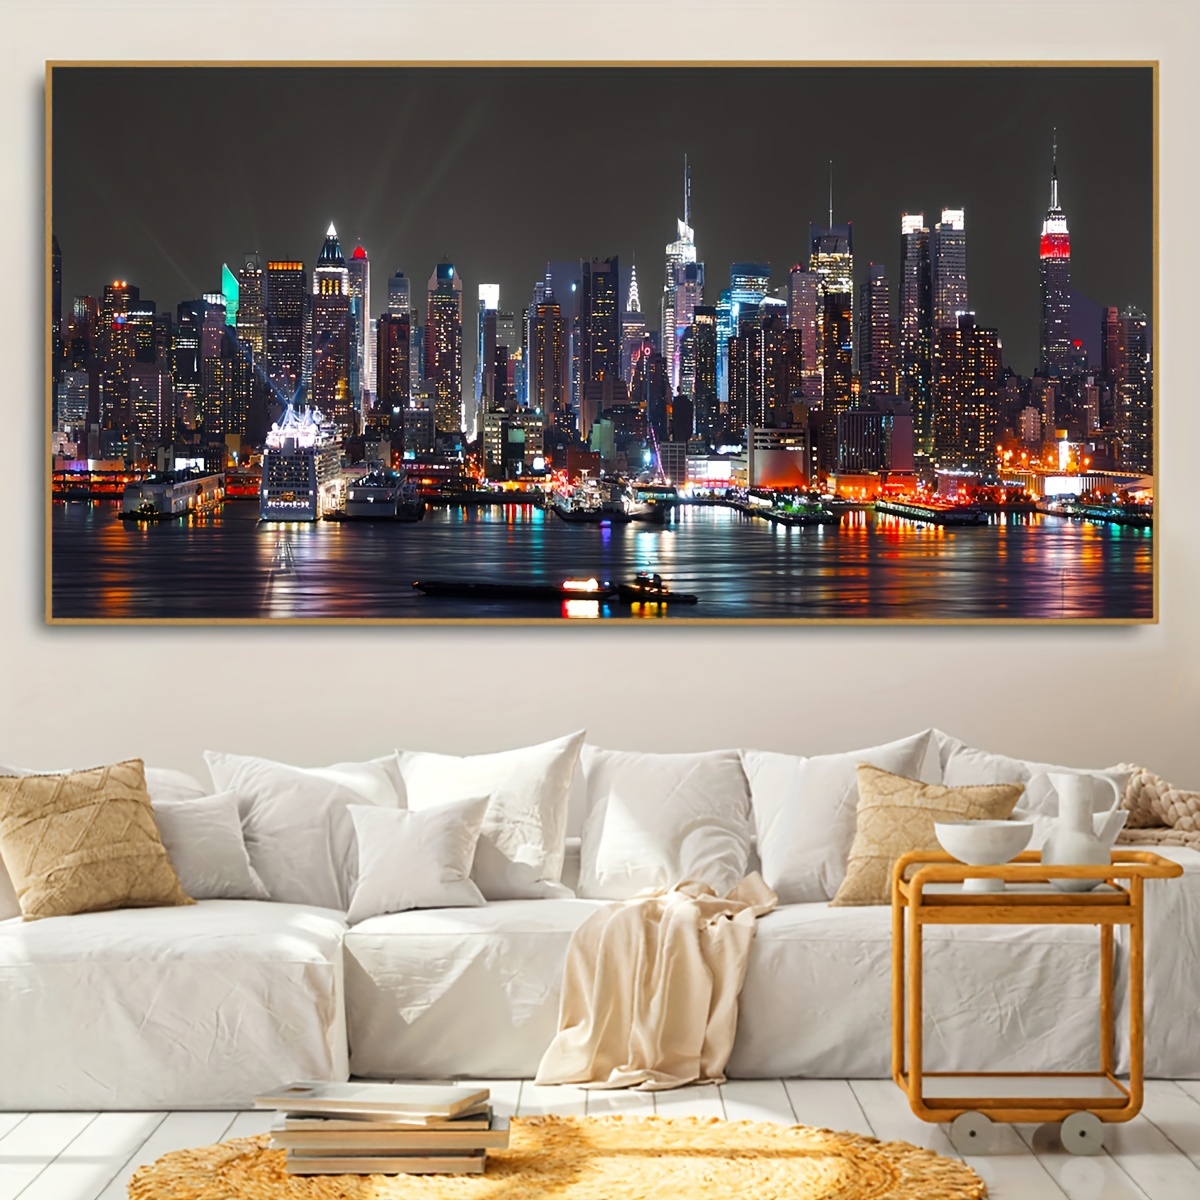 

1pc Unframed Canvas Poster, Modern Art, Town Scenery At Night Wall Art, Ideal Gift For Bedroom Living Room Corridor, Wall Art, Wall Decor, Winter Decor, Room Decoration